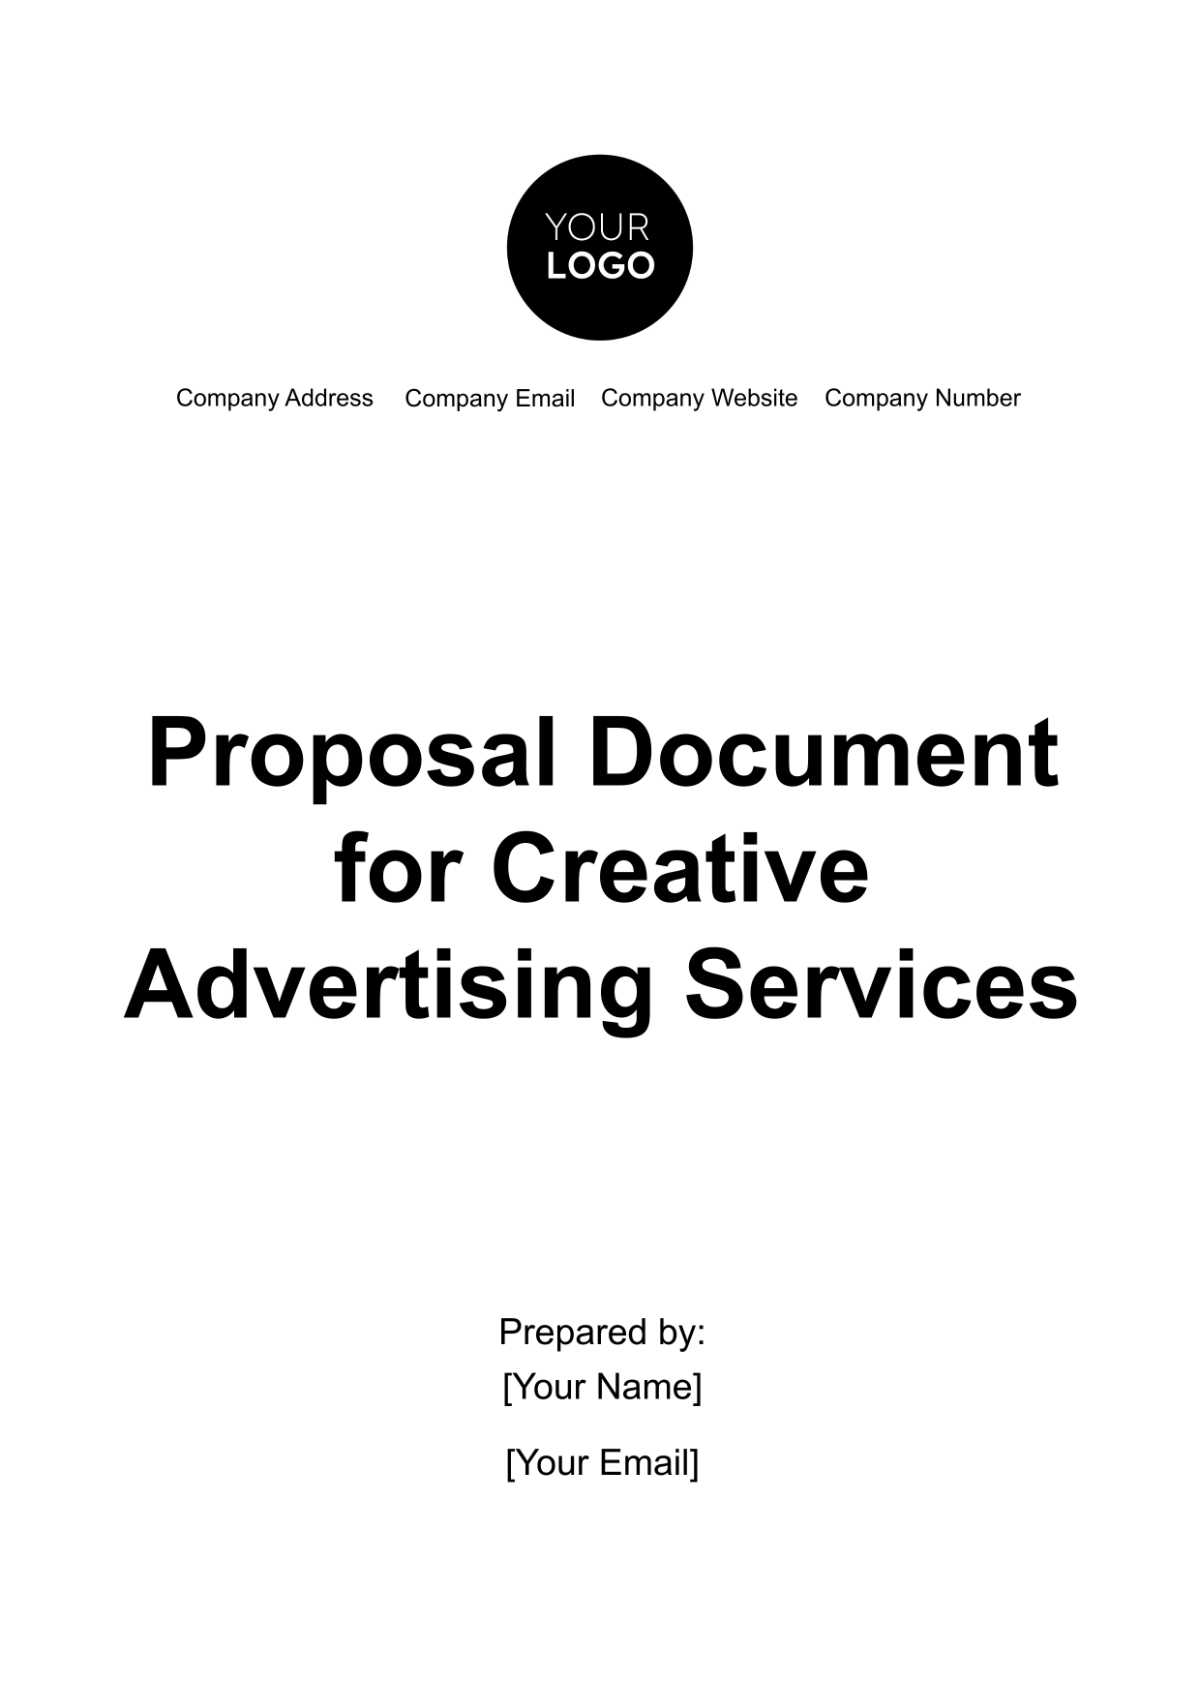 Proposal Document for Creative Advertising Services Template